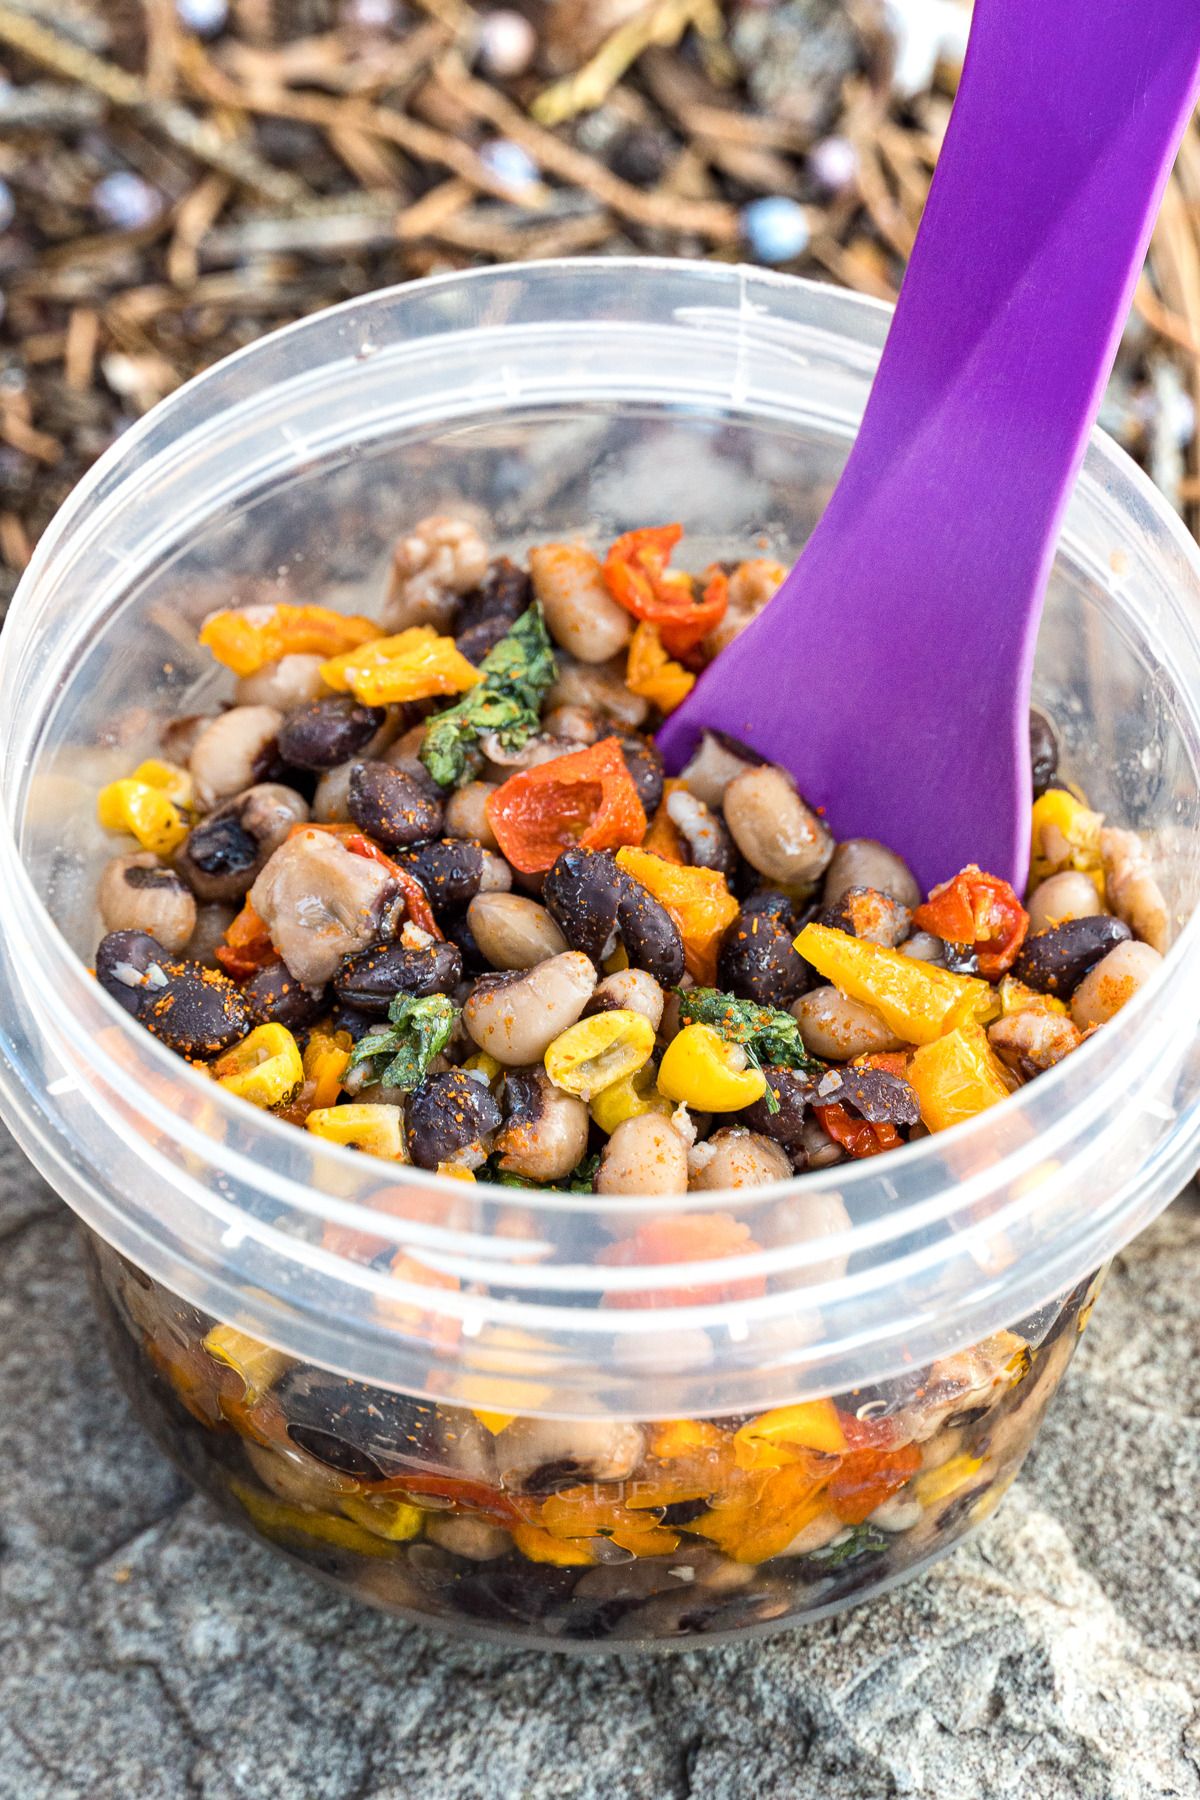 Cowboy caviar in a small bowl with a purple spoon